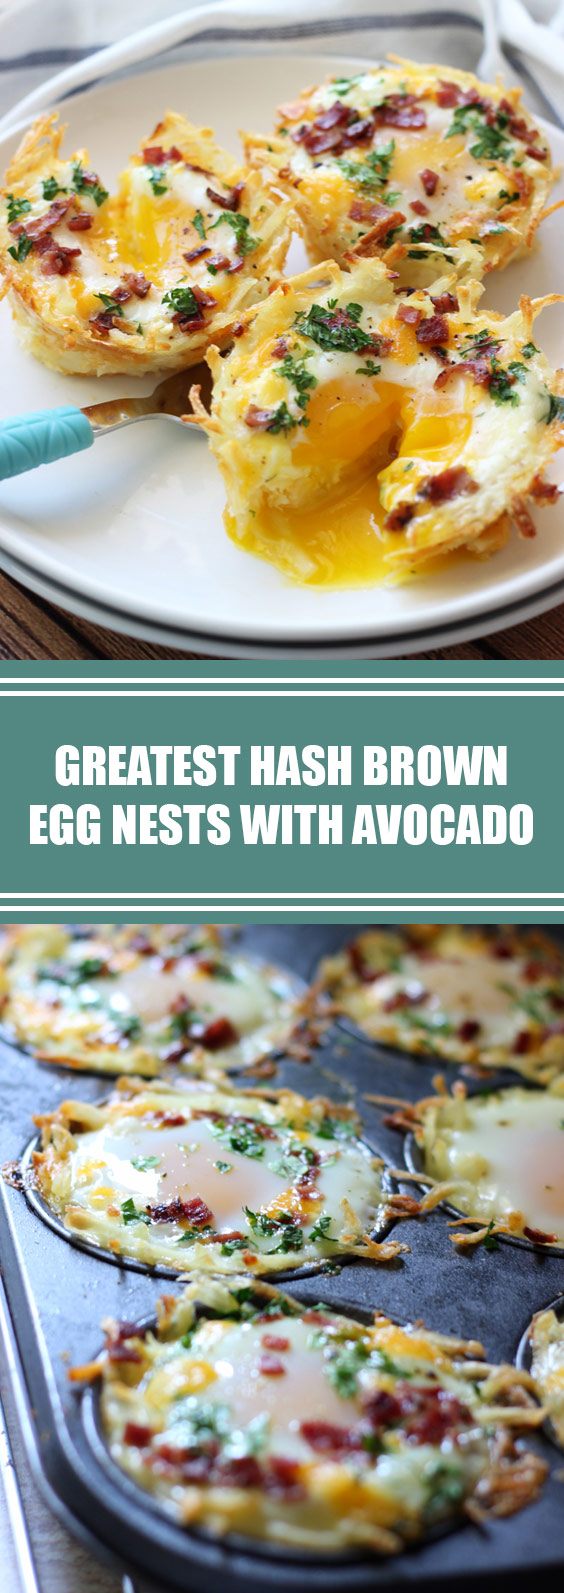 Greatest Hash Brown Egg Nests with Avocado #breakfast #eggrecipes